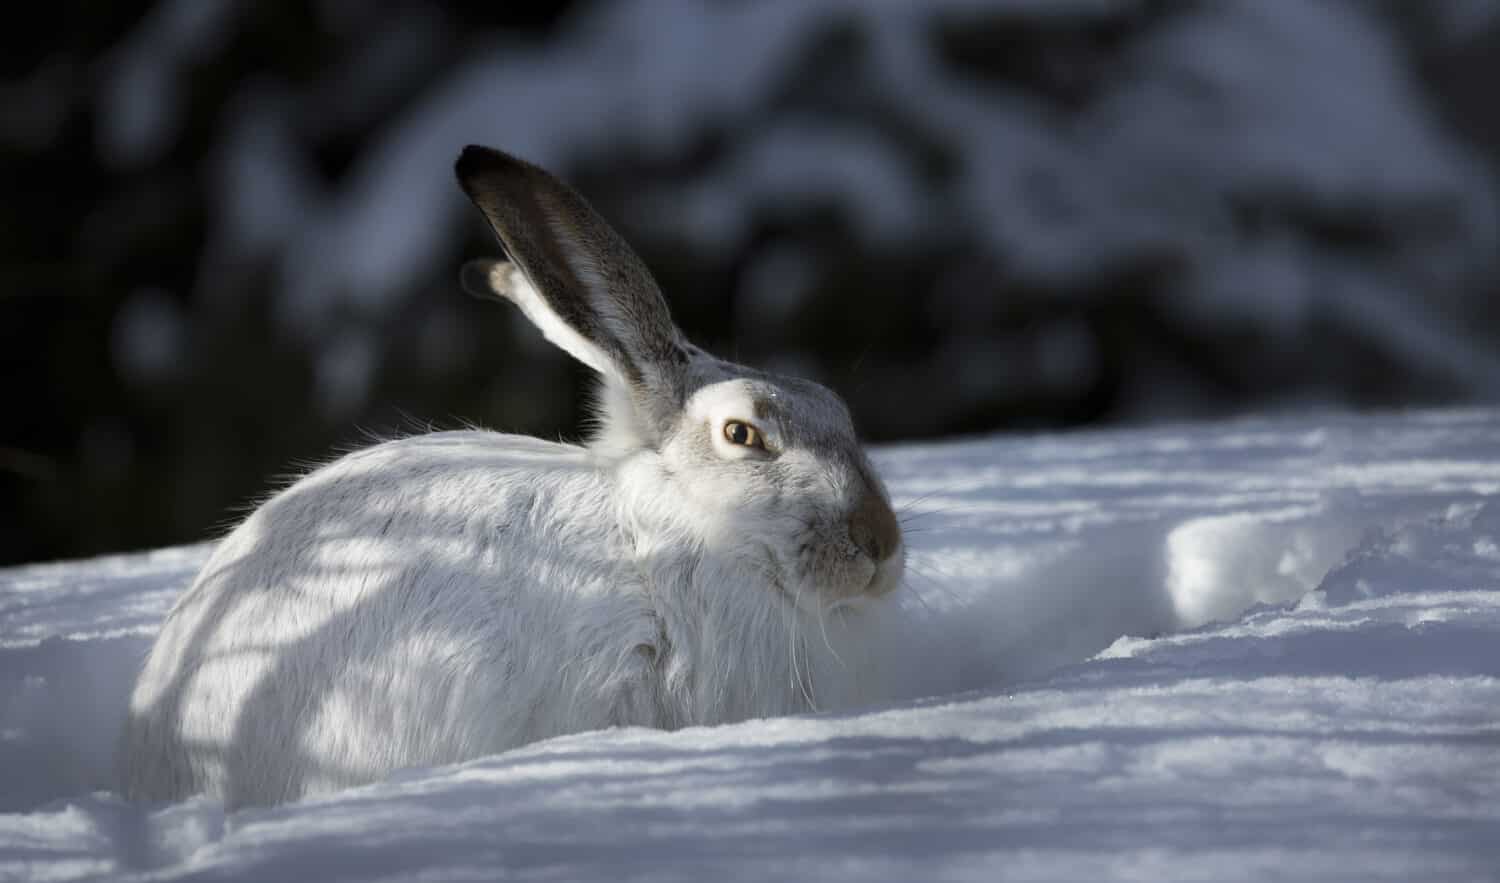 Hare in the Shadows